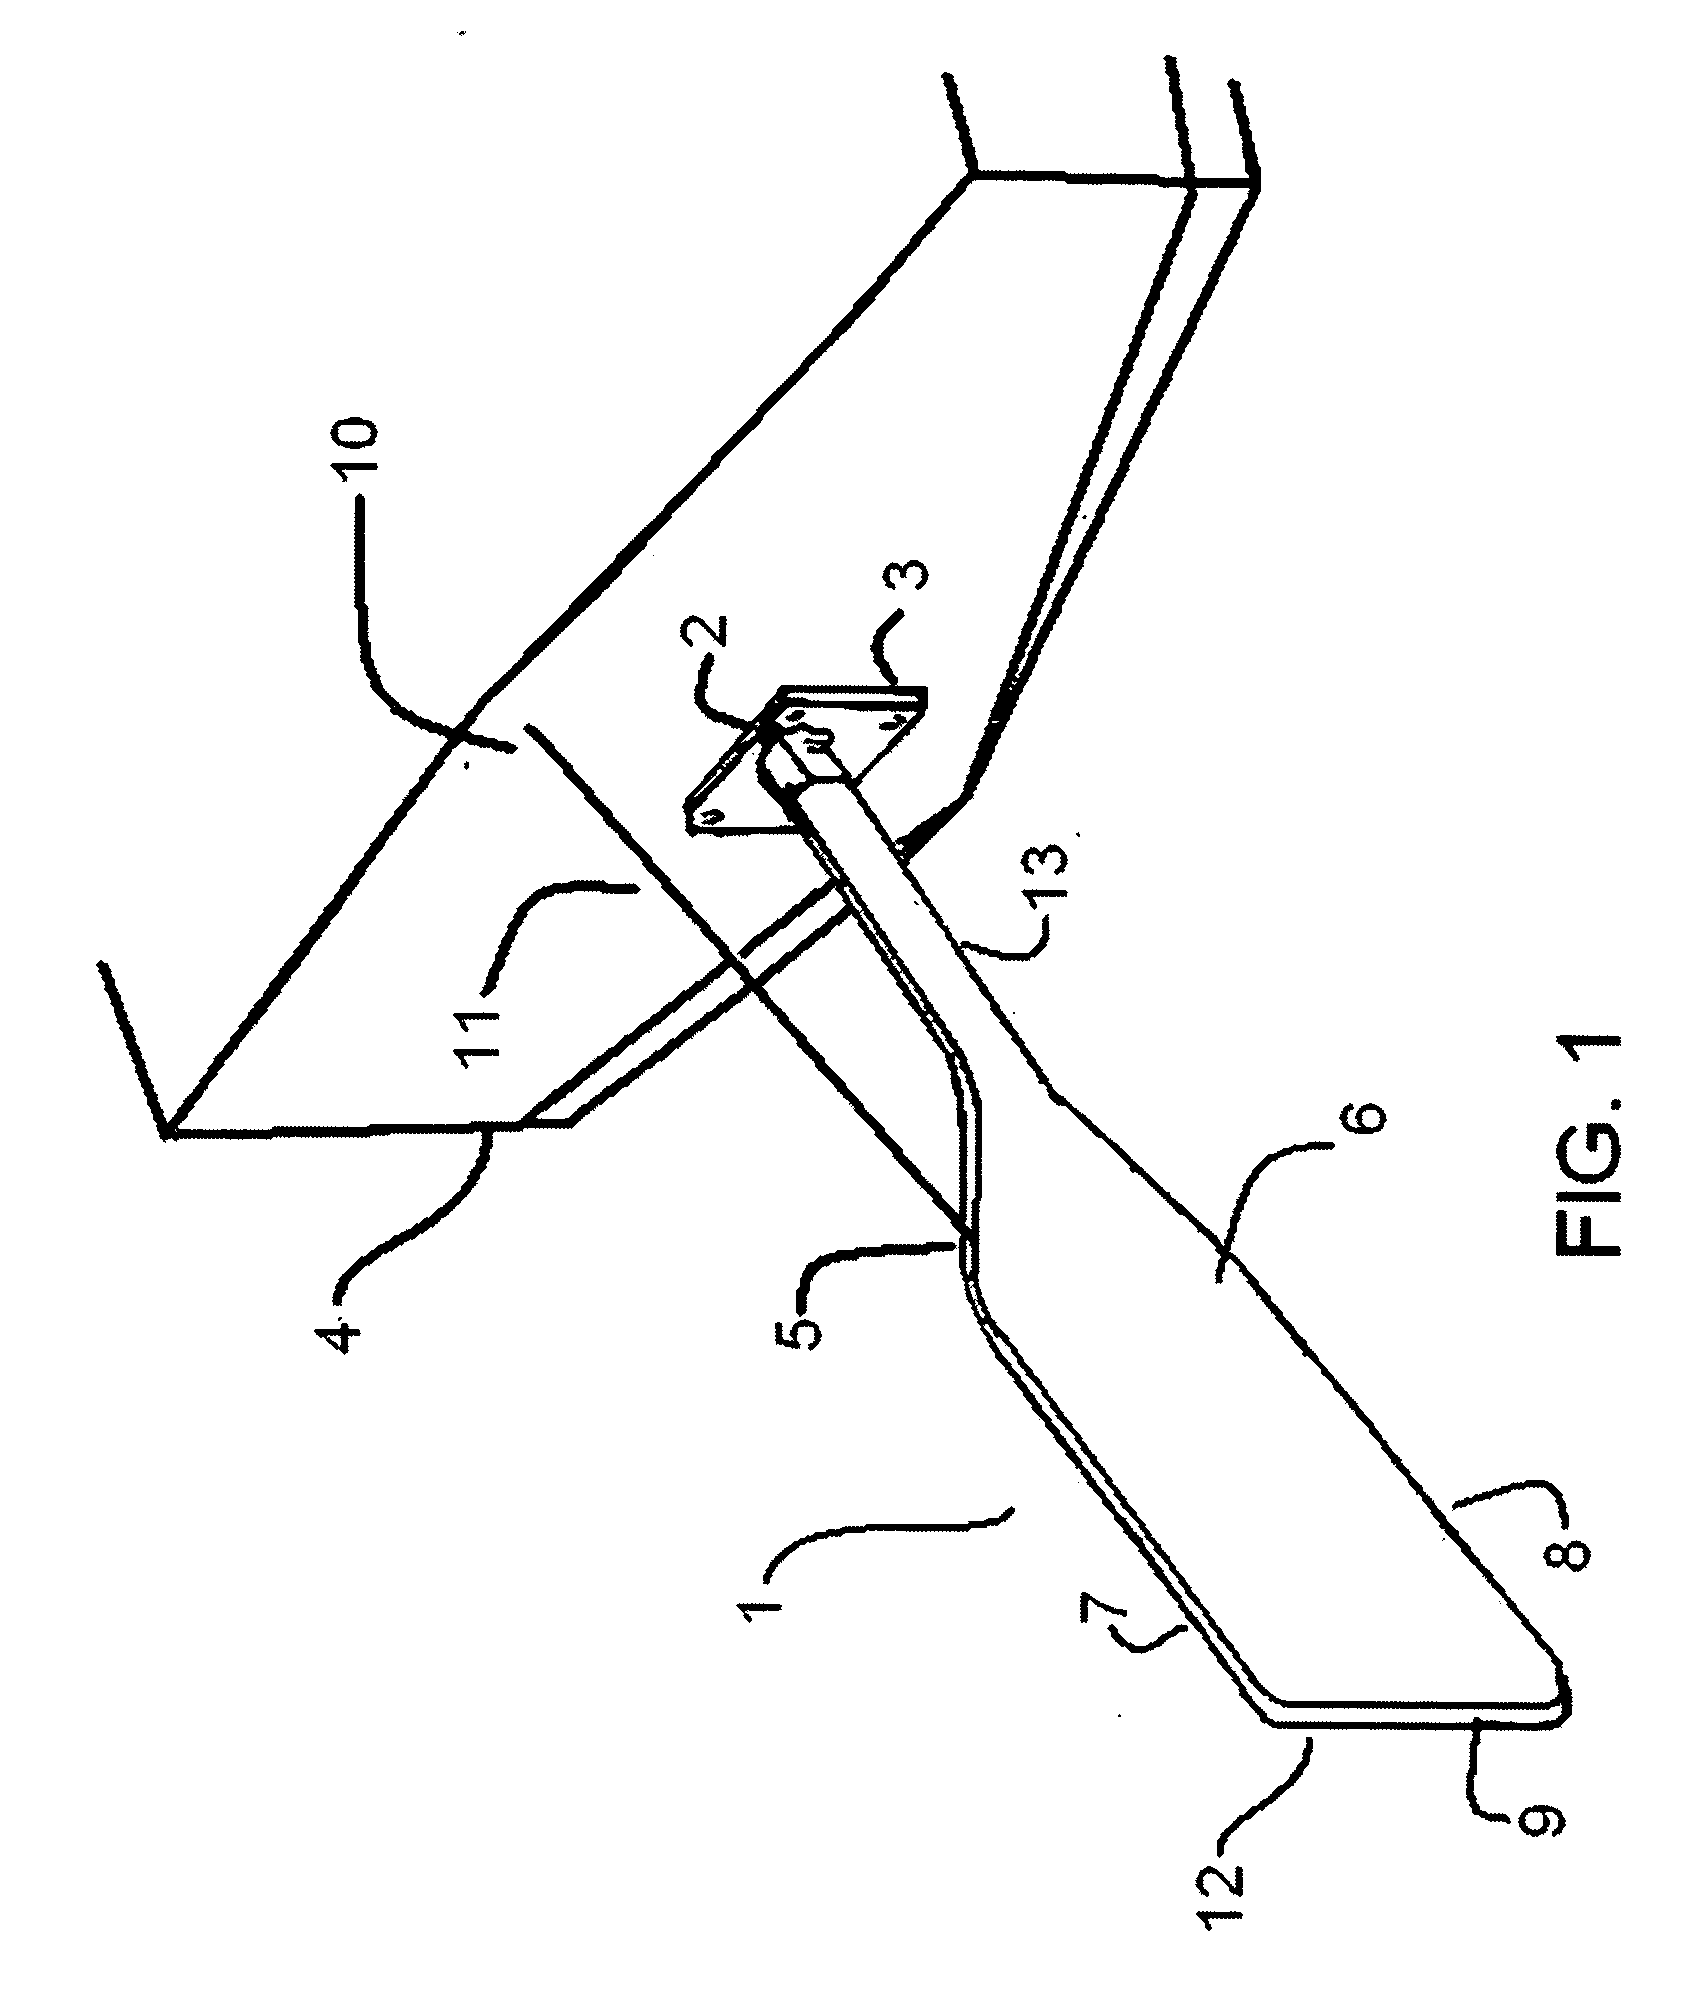 Water craft stabilizing device